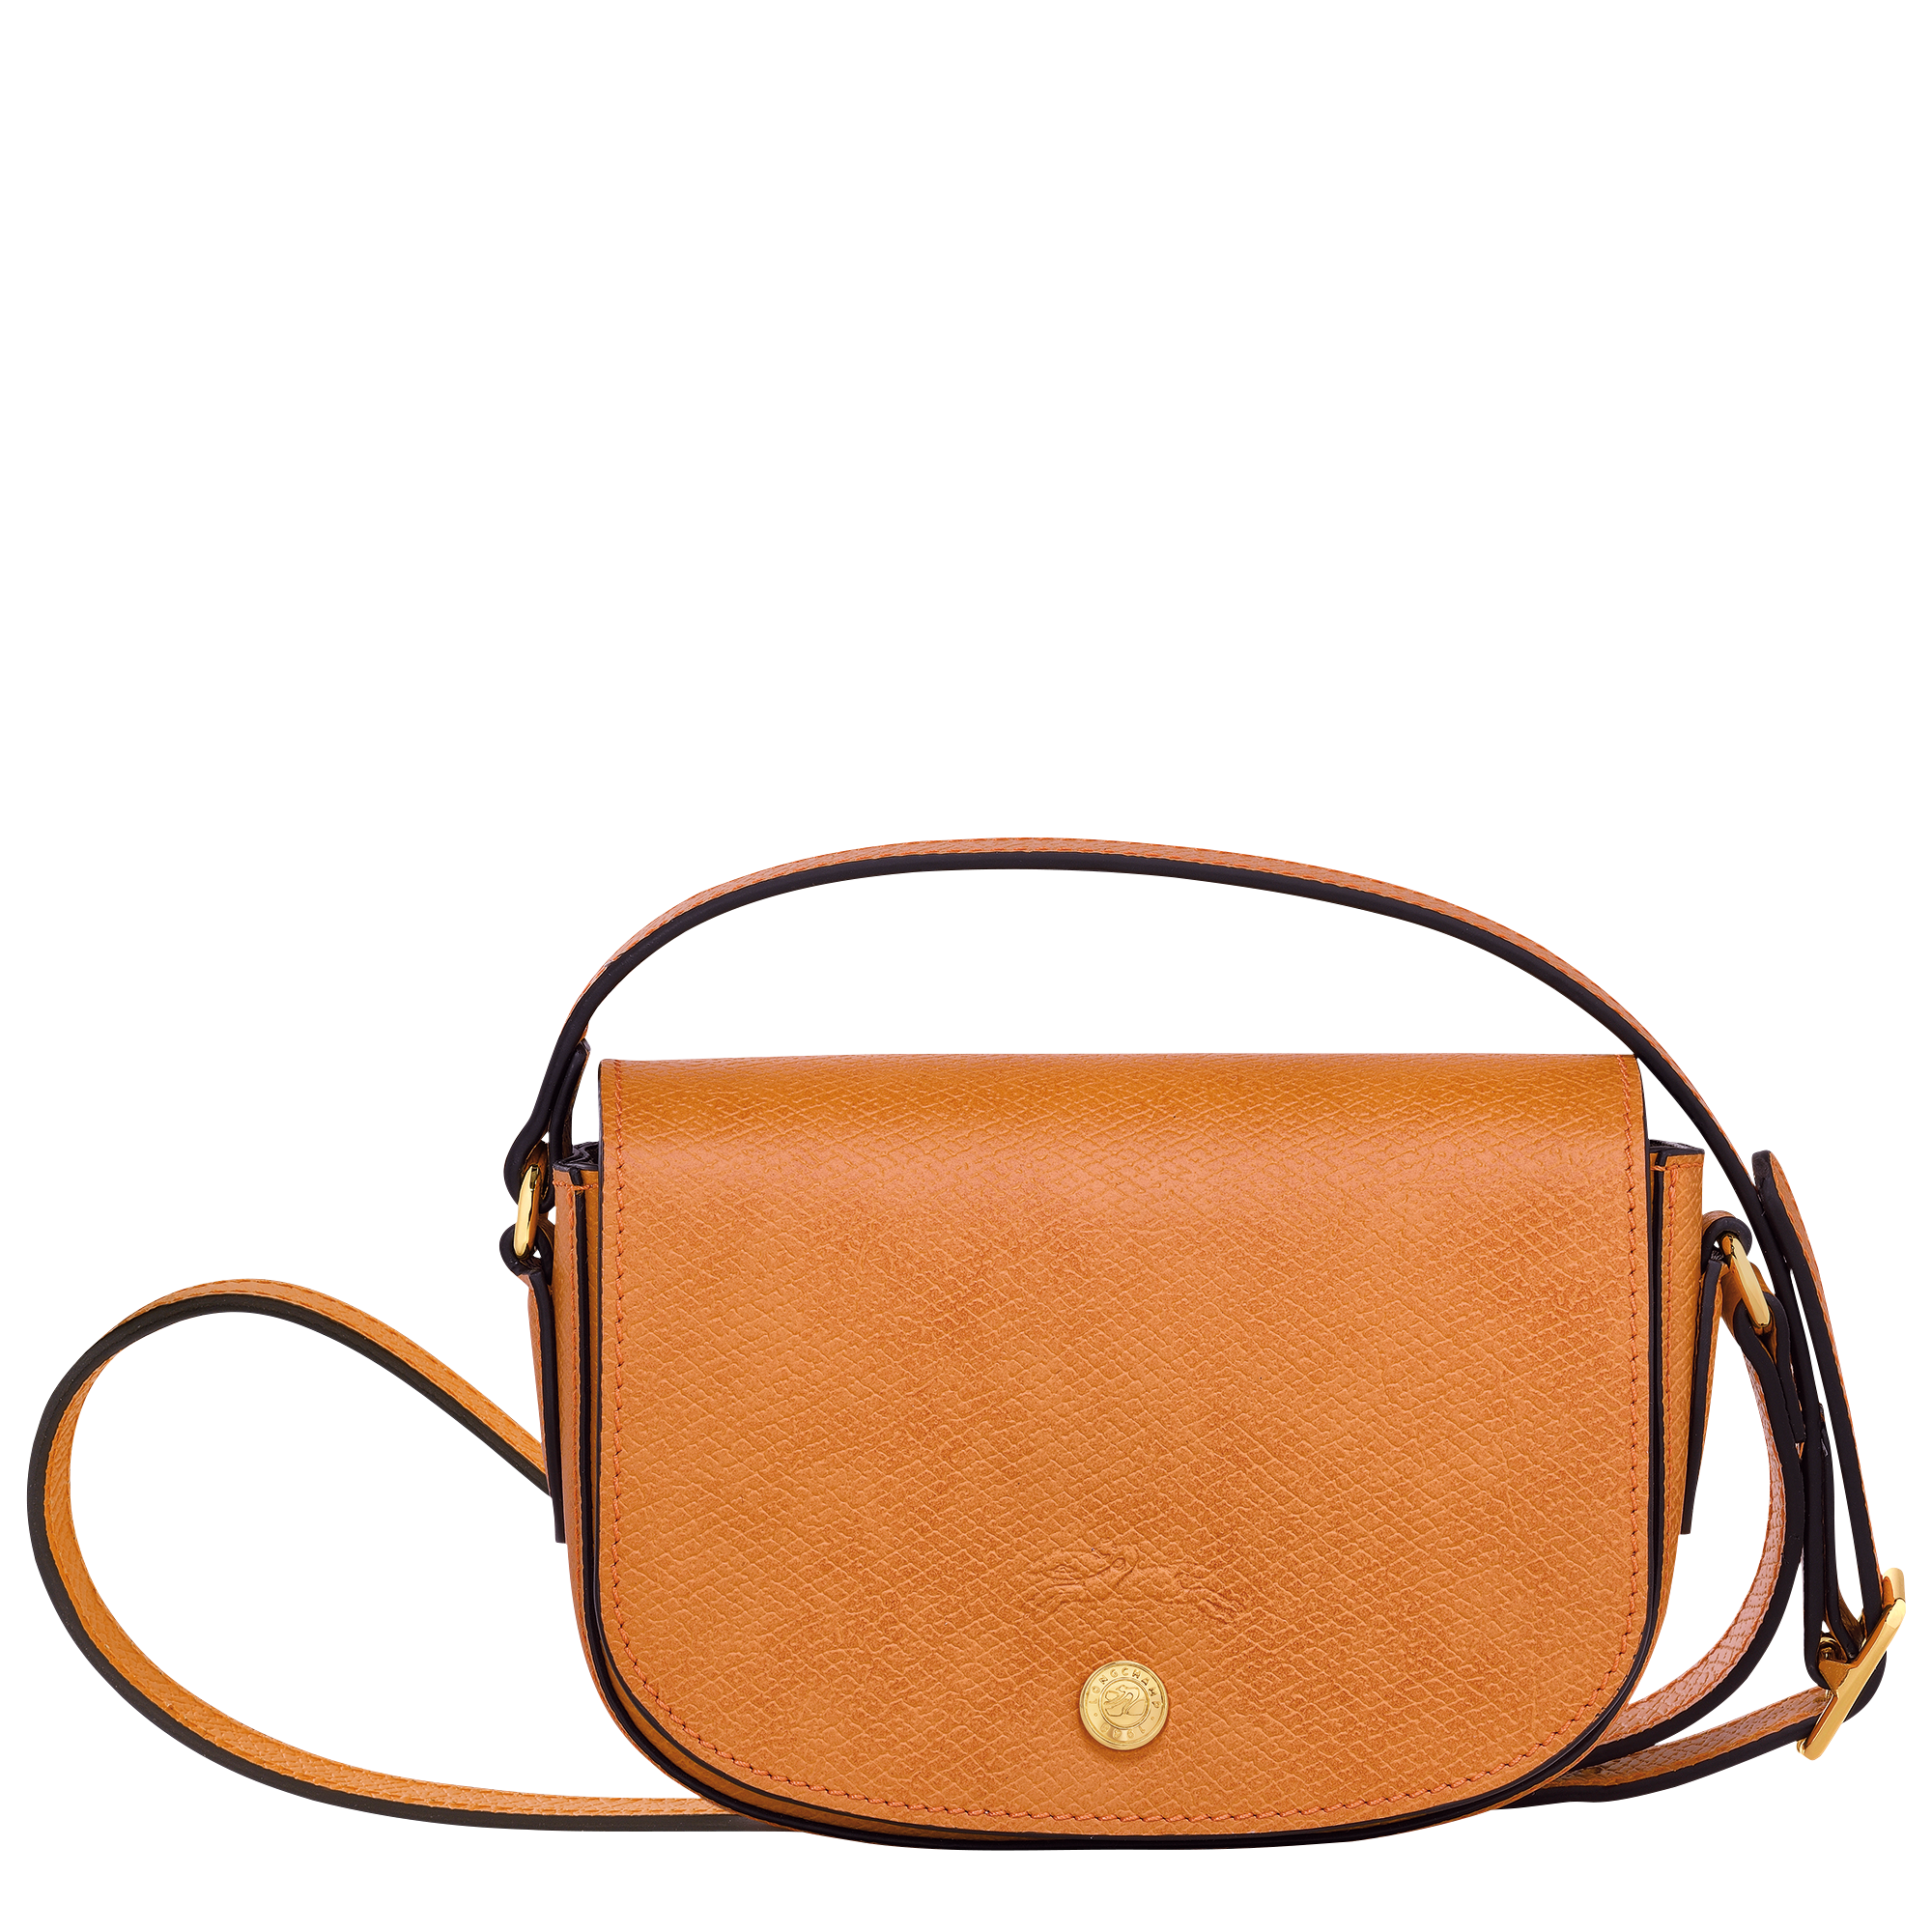 Laptop Bags | Buy Laptop Bags for Women Online - Accessorize India